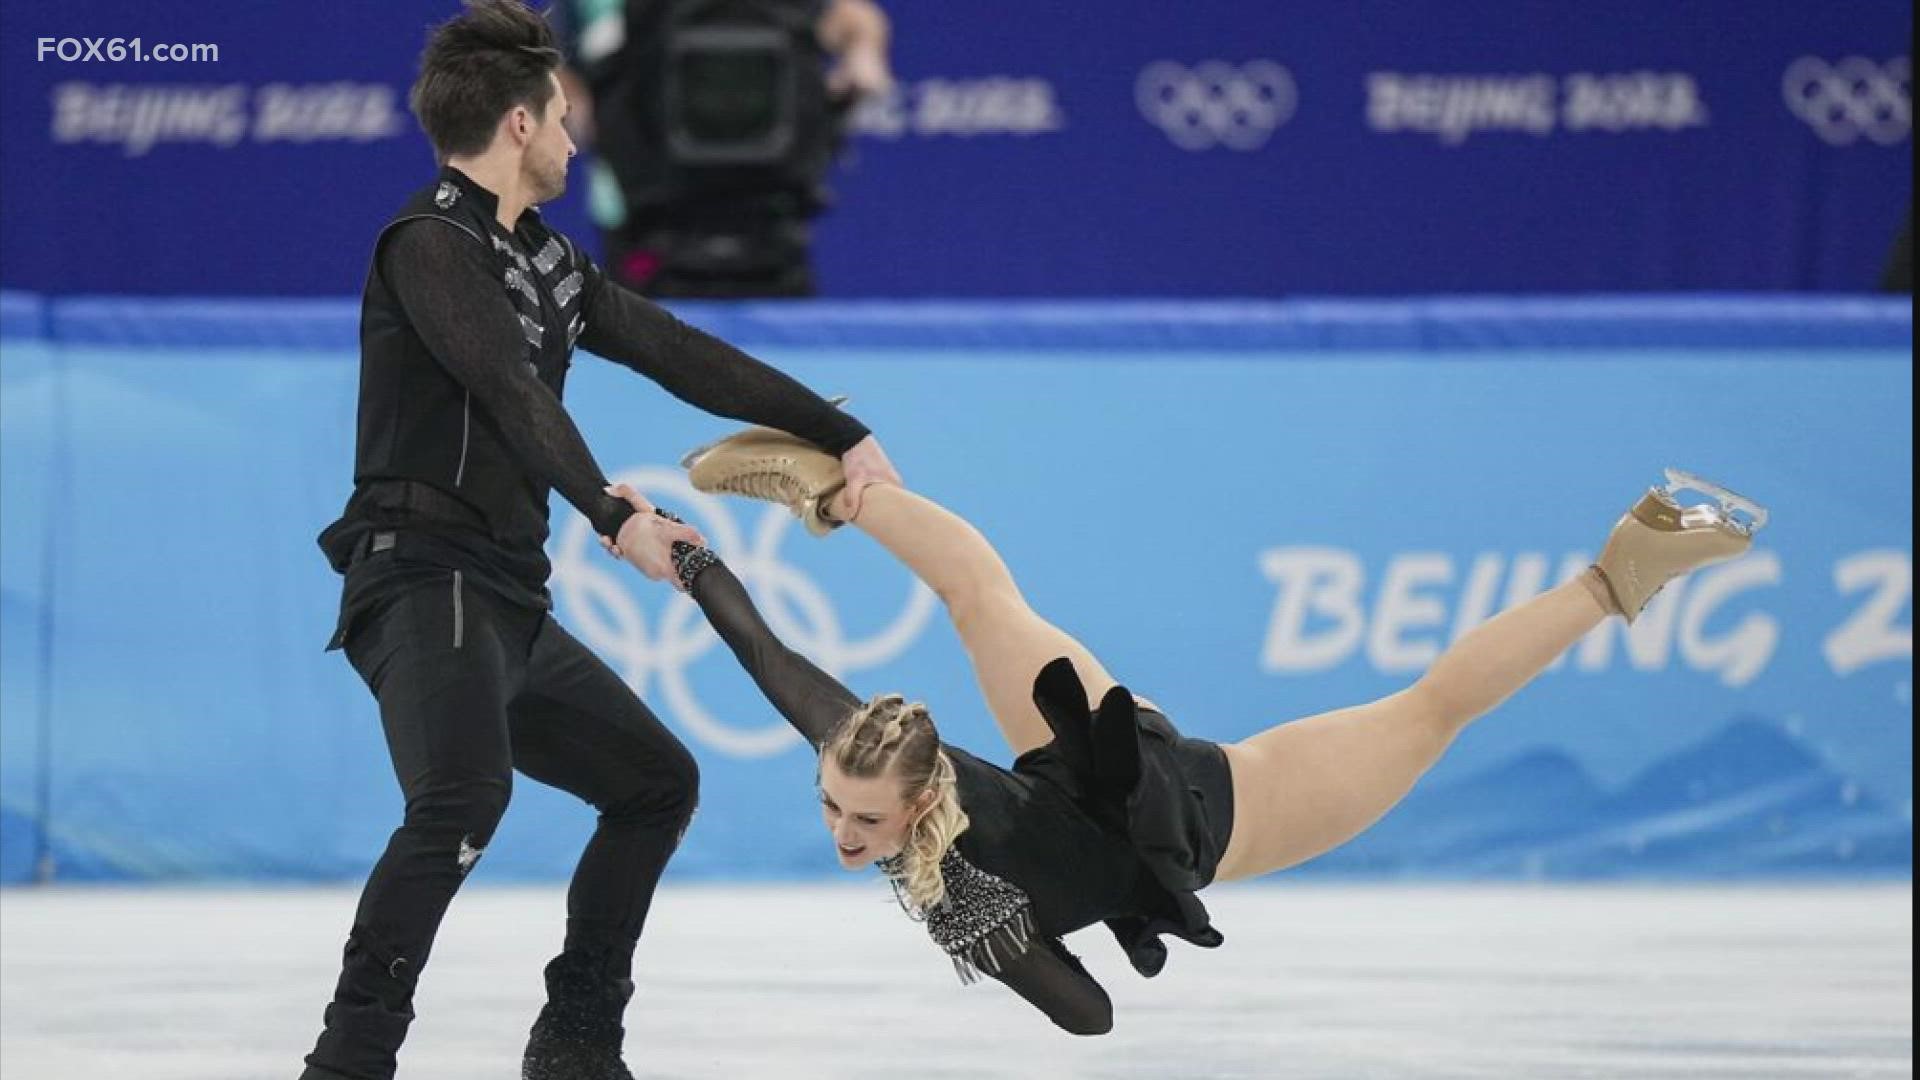 The duo gave a season-best performance in rhythm dance on the opening day of figure skating.